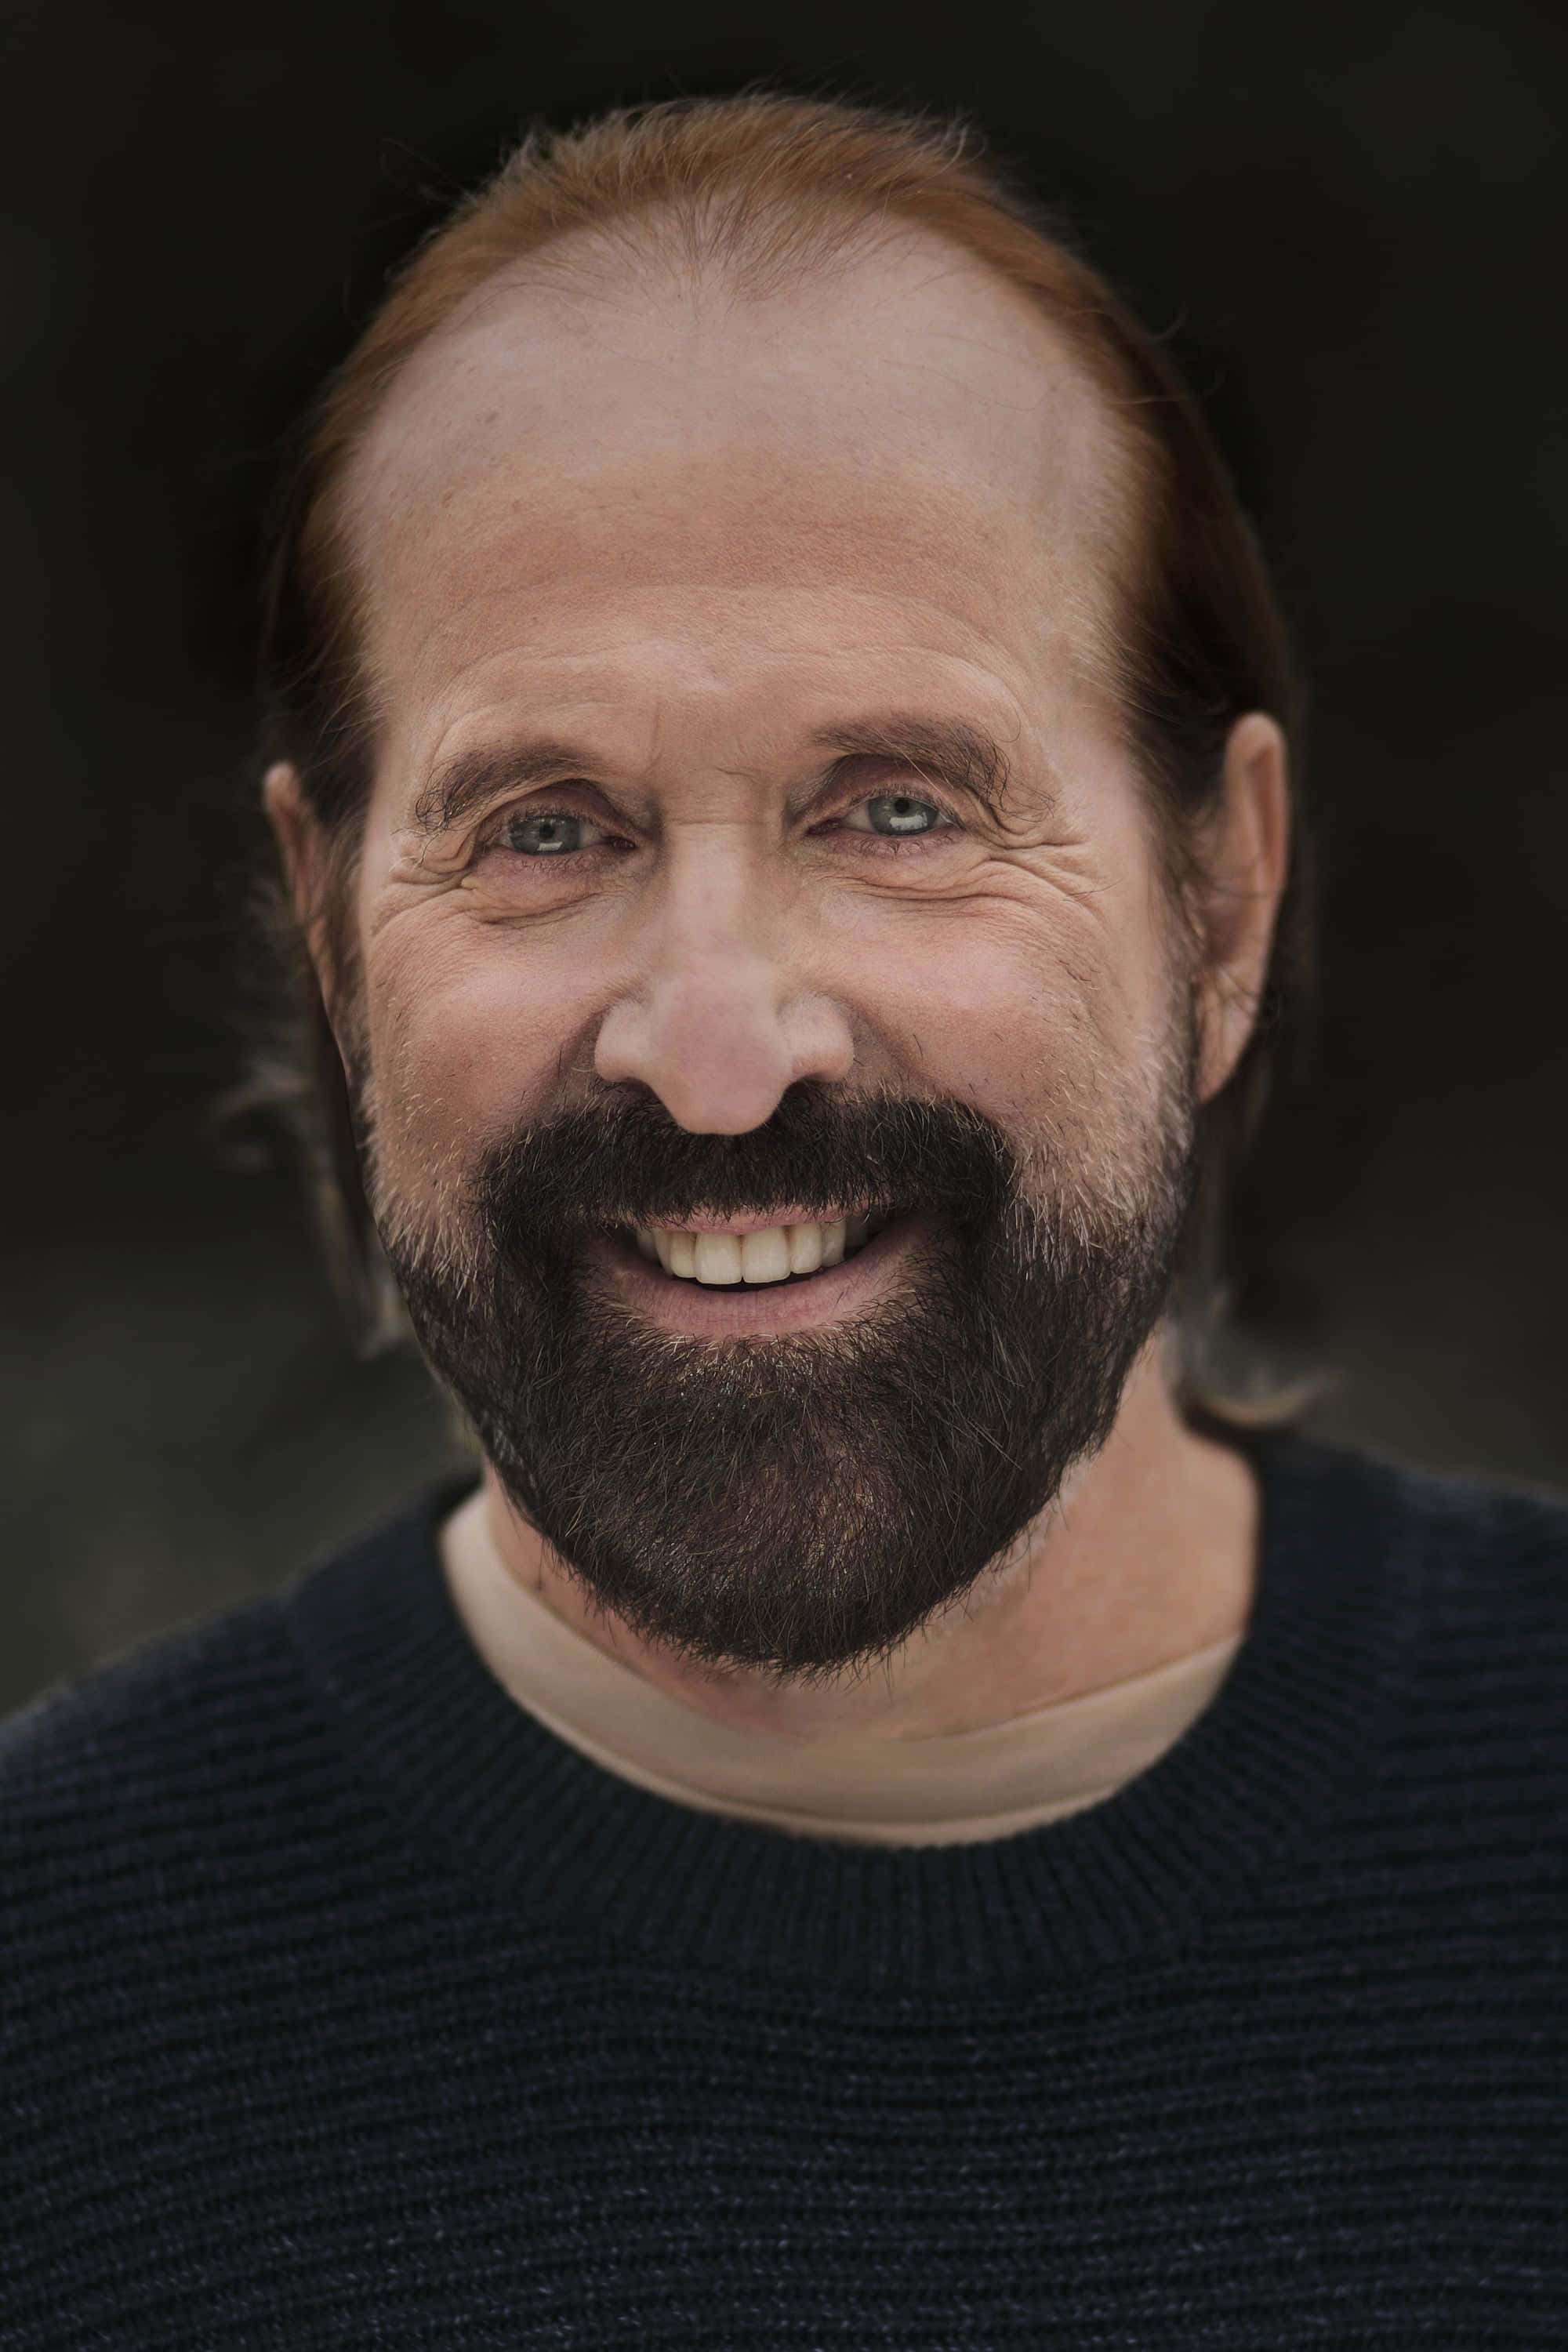 Actor Peter Stormare in character for a movie Wallpaper